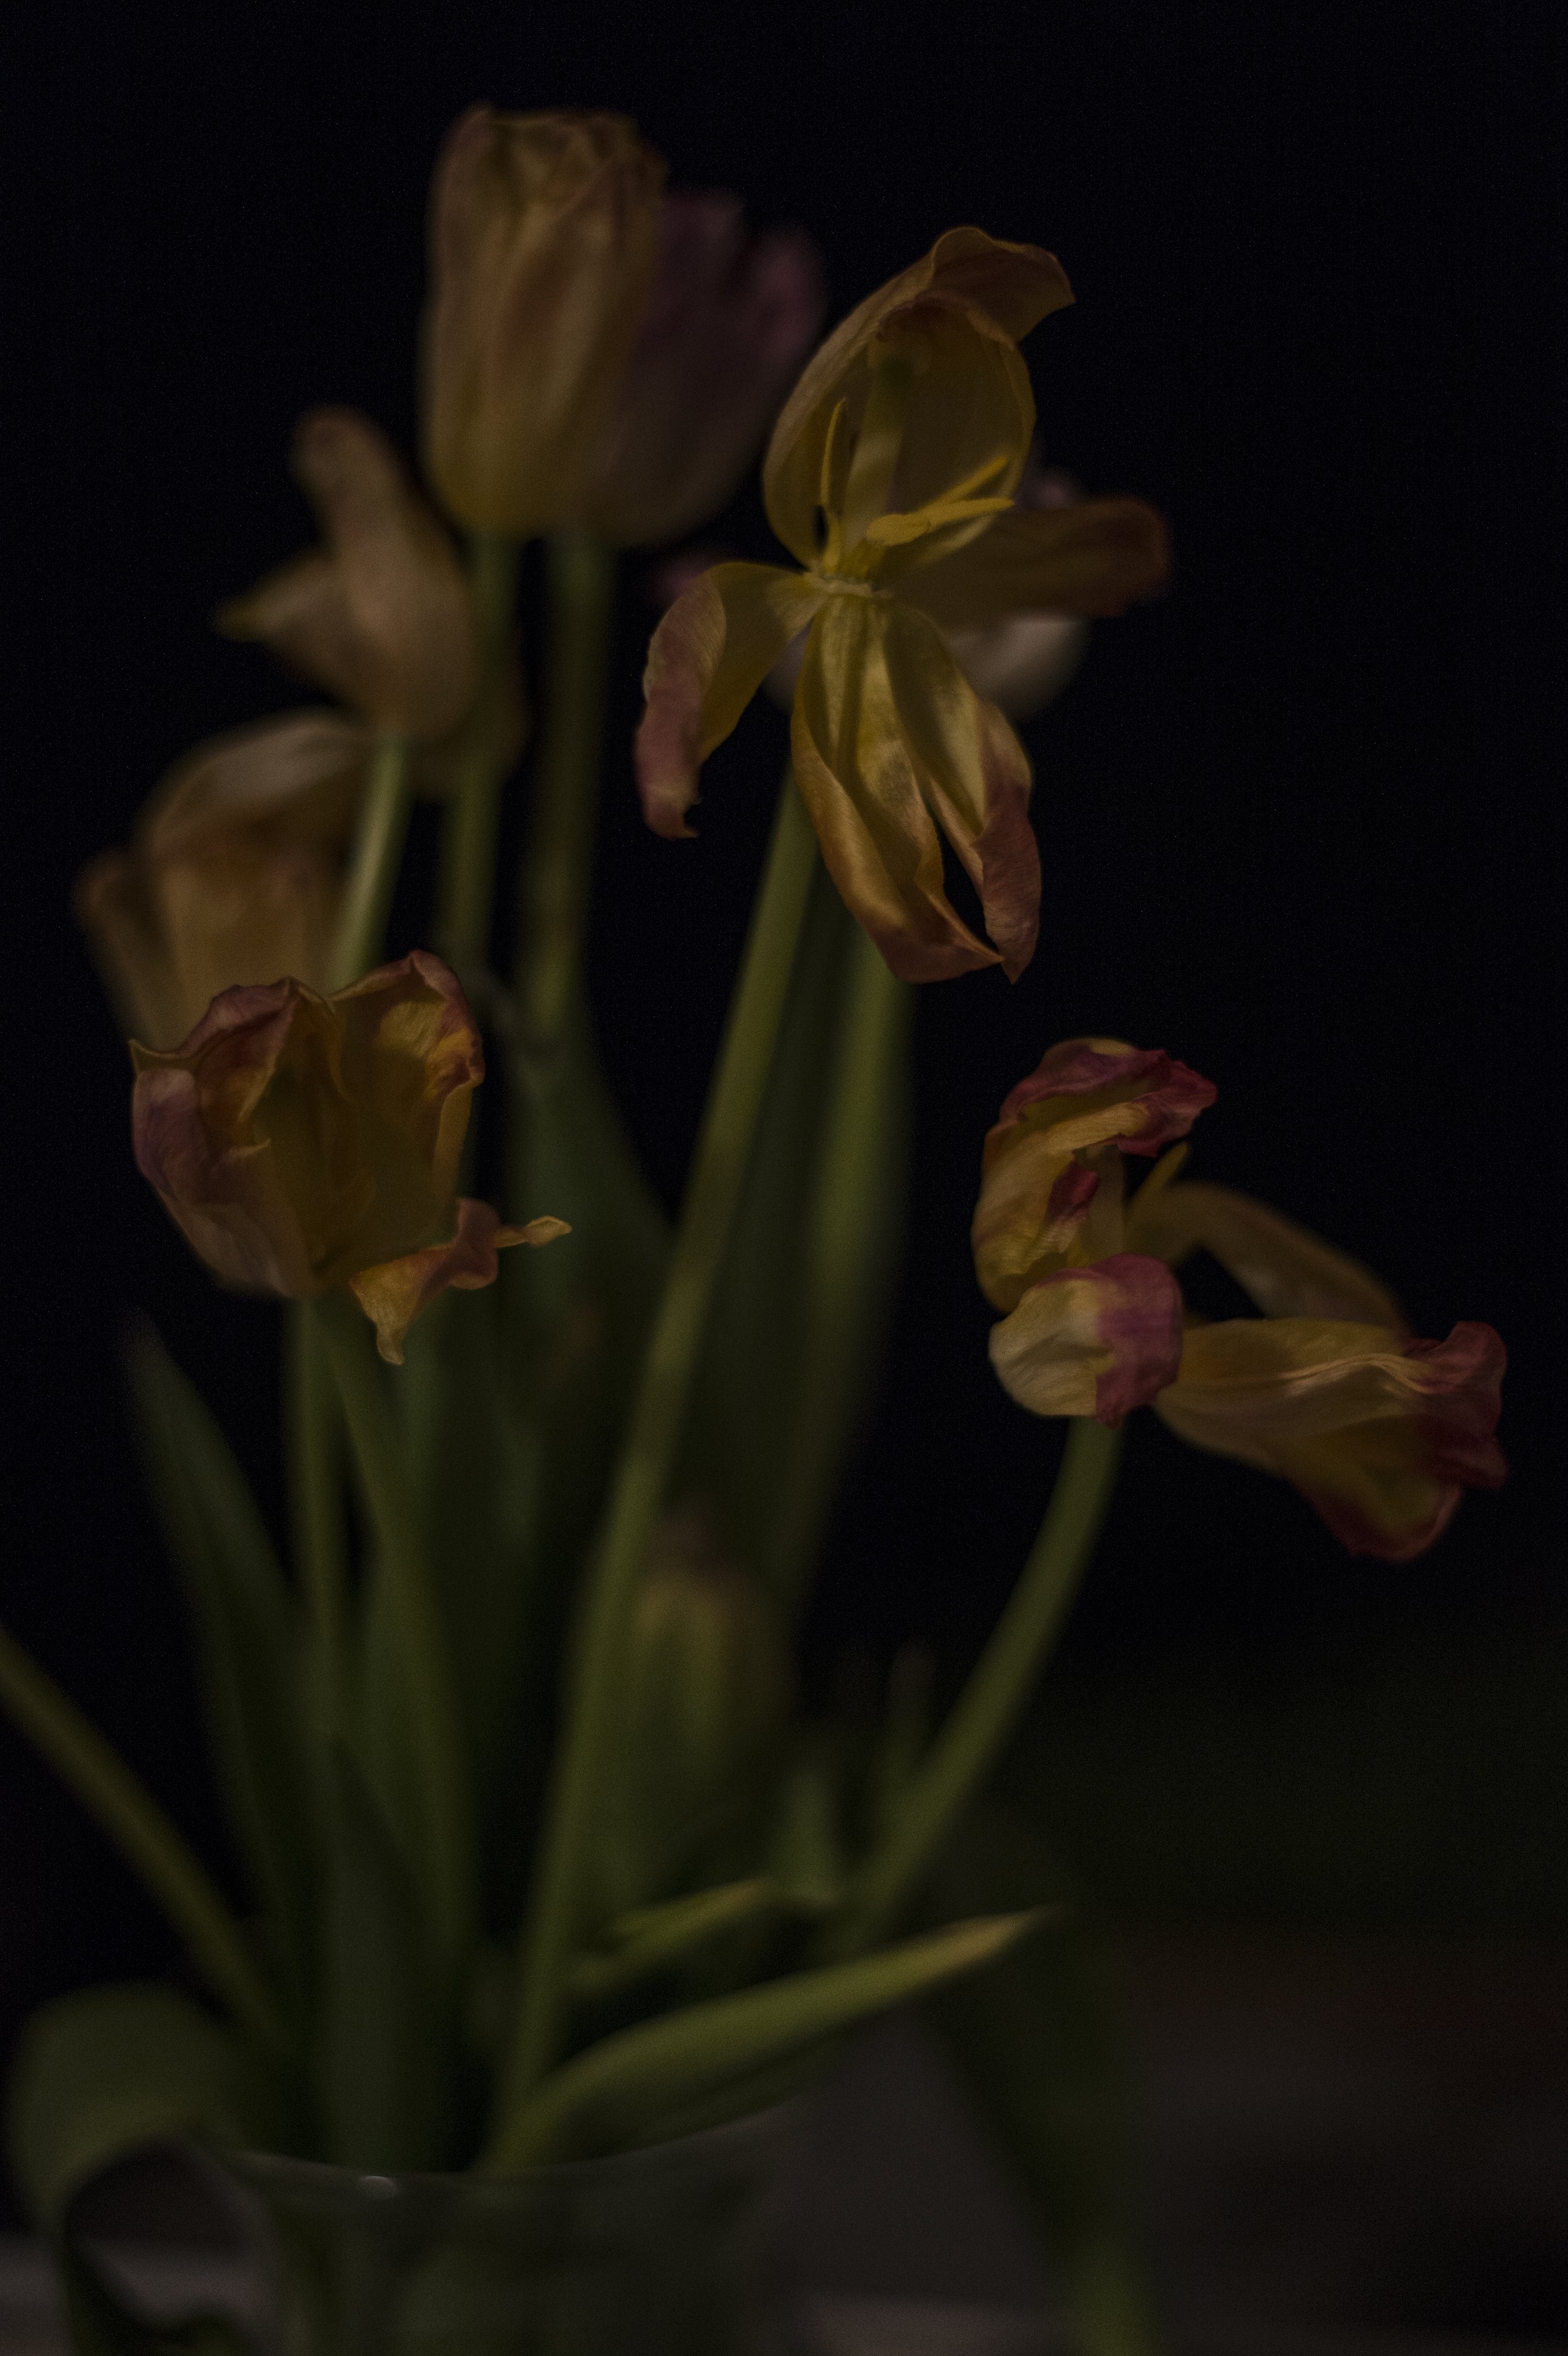 Still Life with Tulips #2